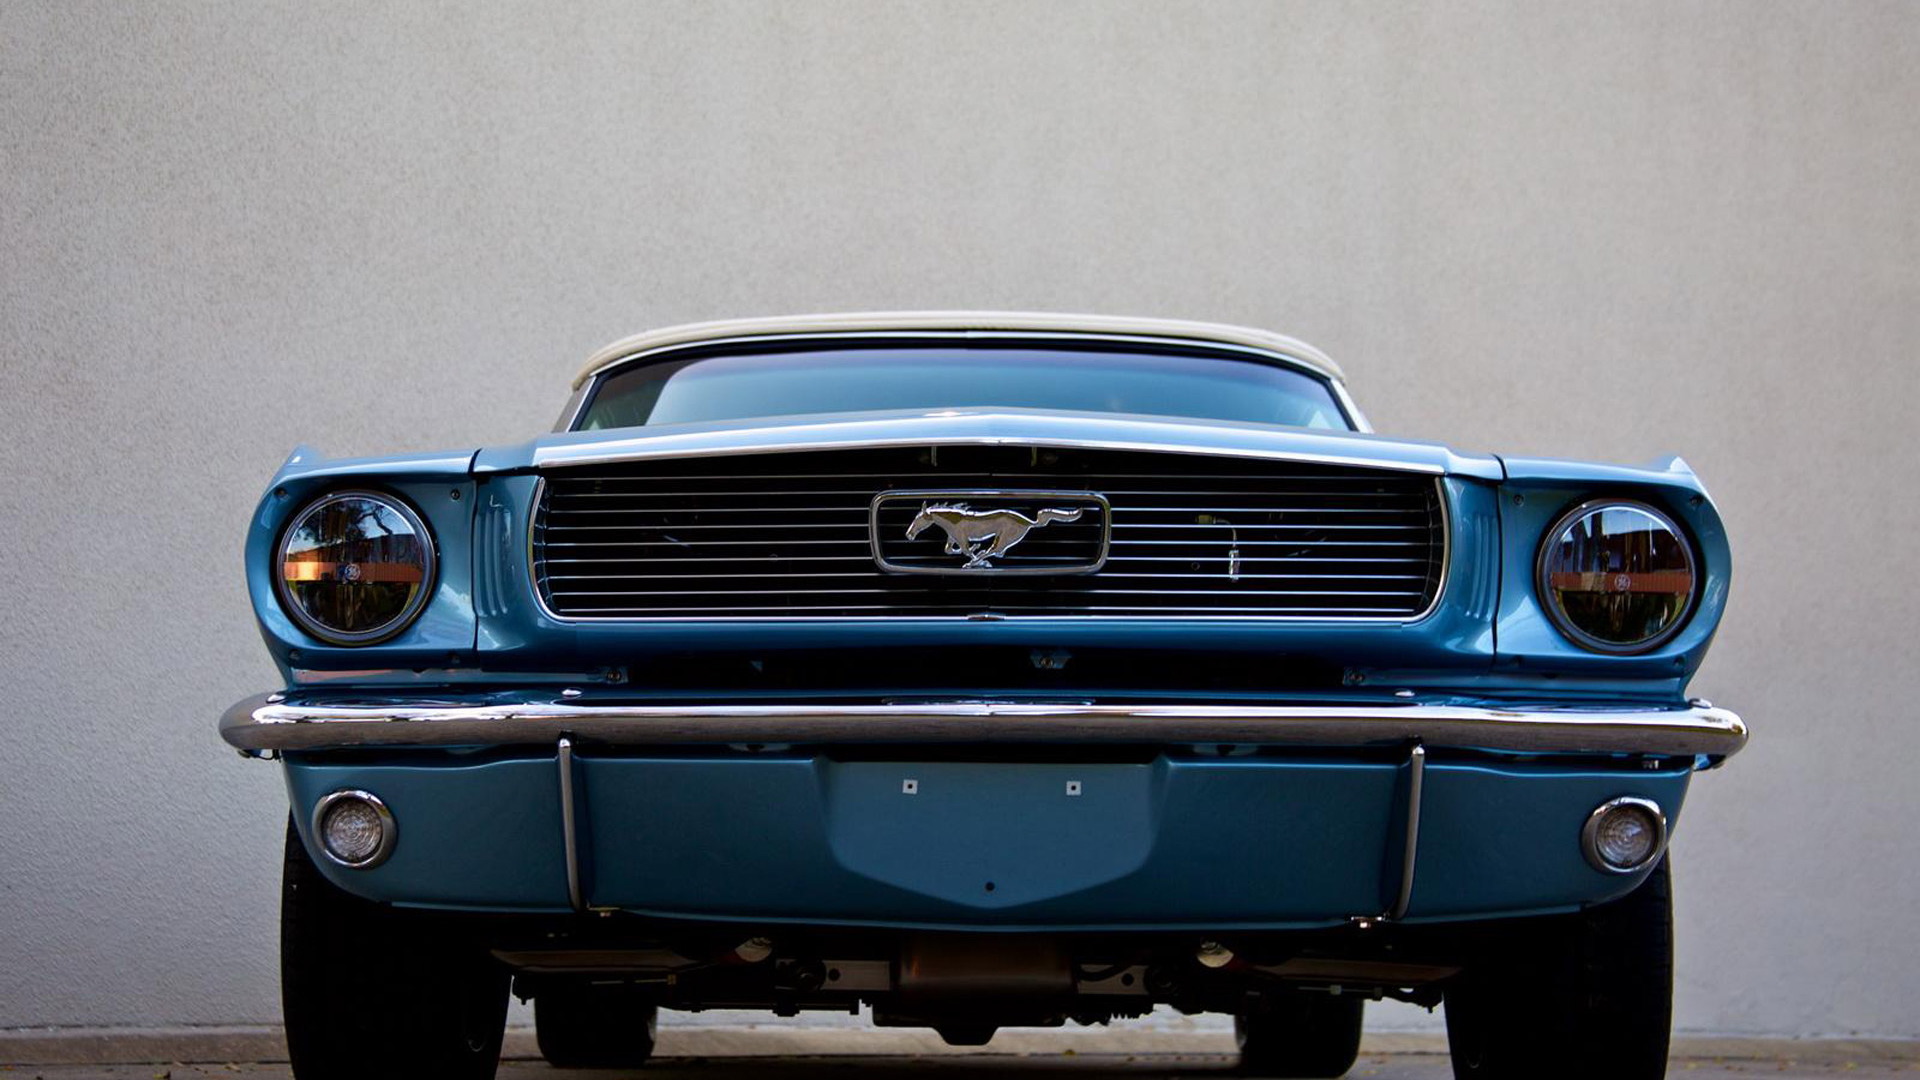 1966 Ford Mustang replica by Revology